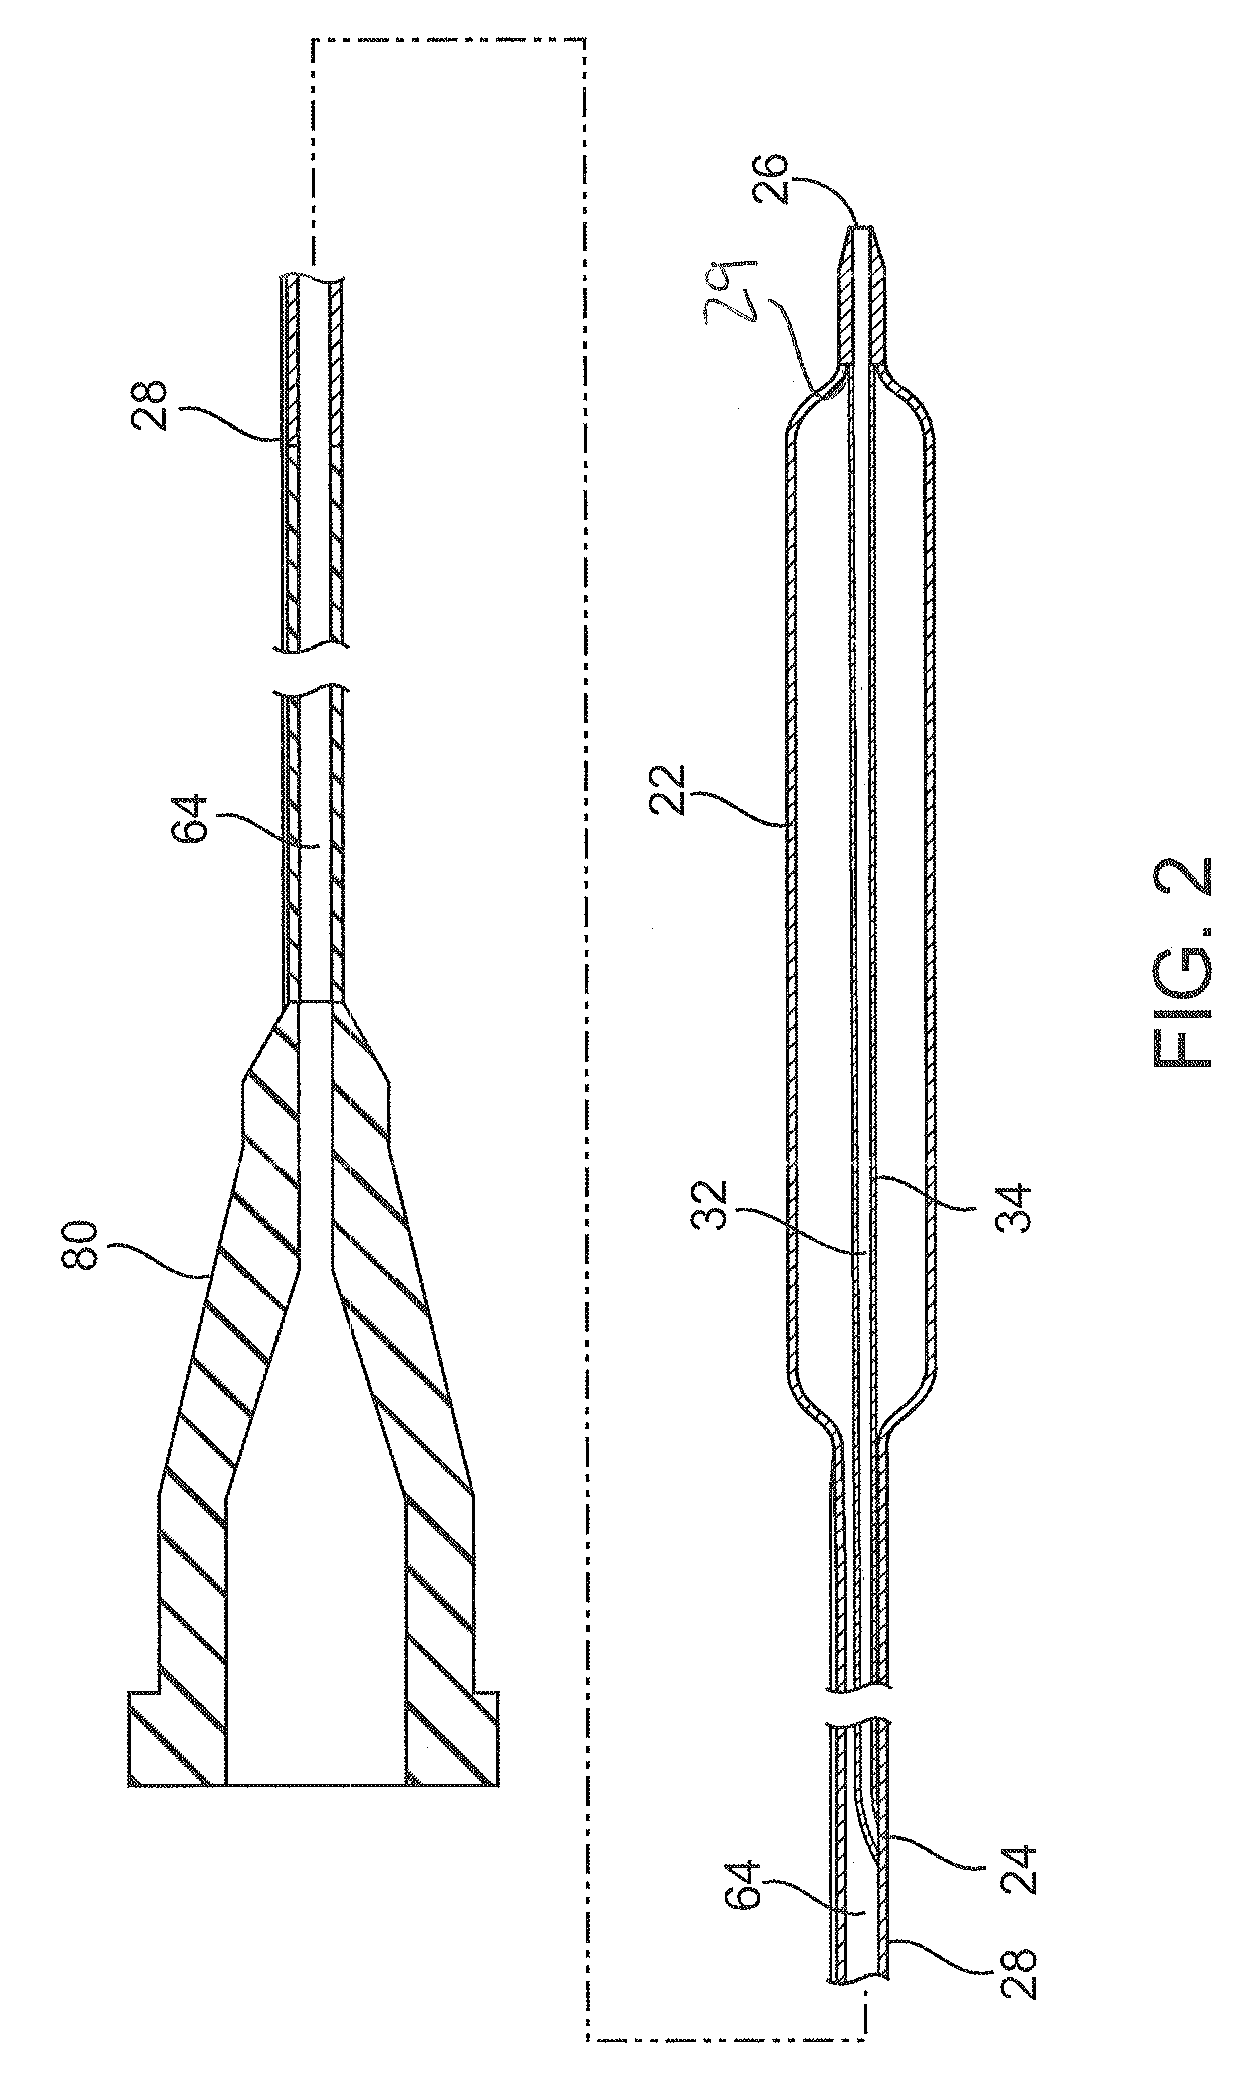 Catheter components formed of polymer with particles or fibers